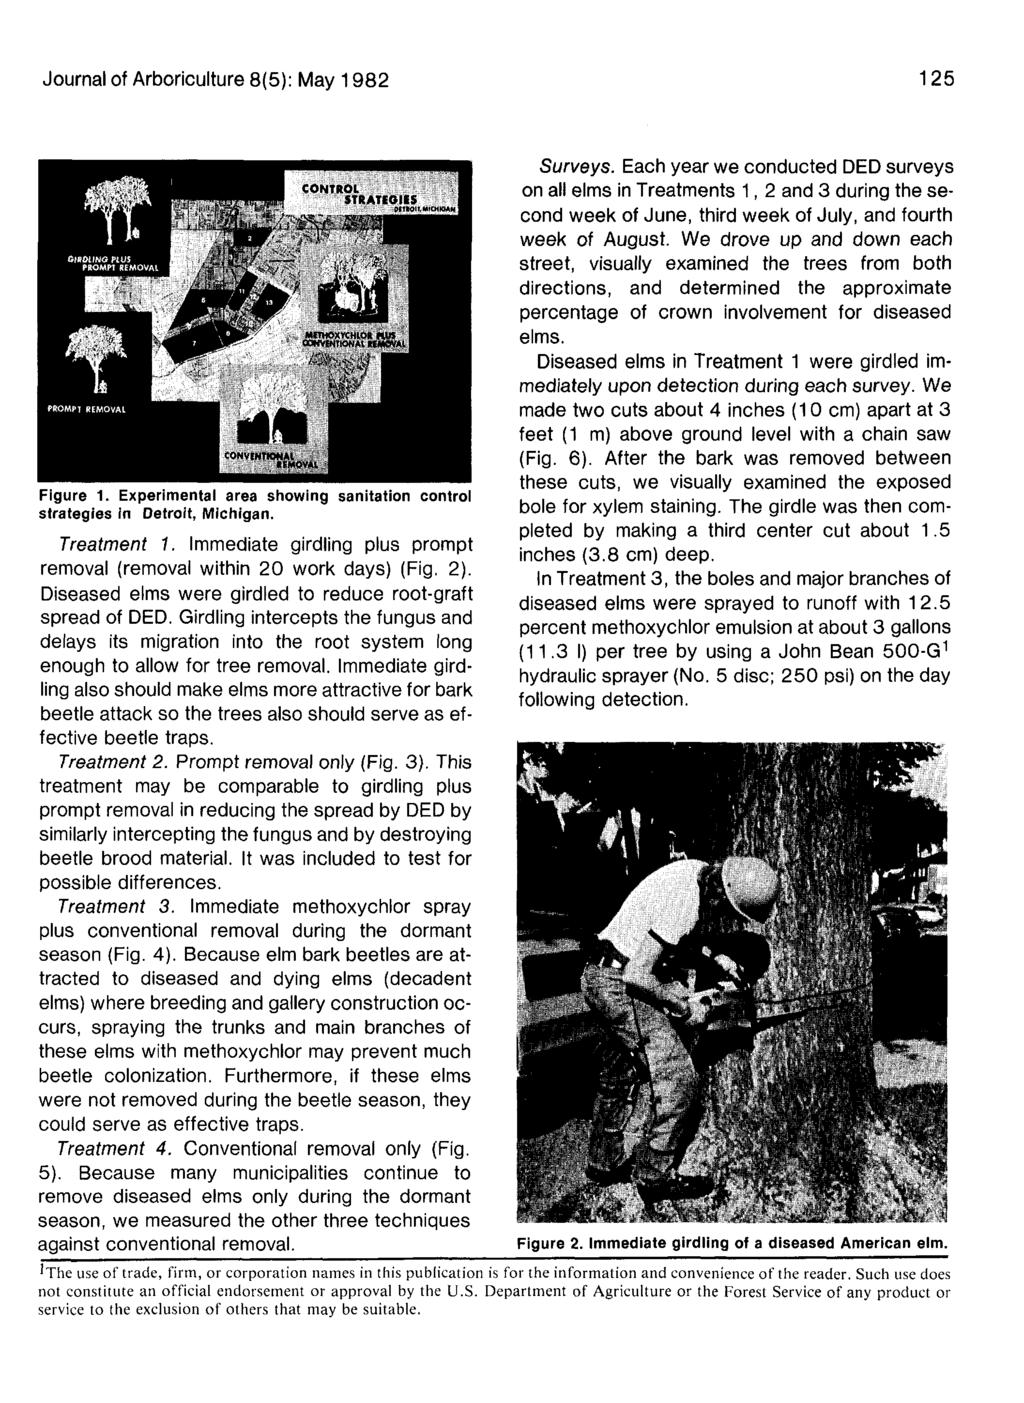 Journal of Arboriculture 8(5): May 1982 125 Figure 1. Experimental area showing sanitation control strategies in Detroit, Michigan. Treatment 1.